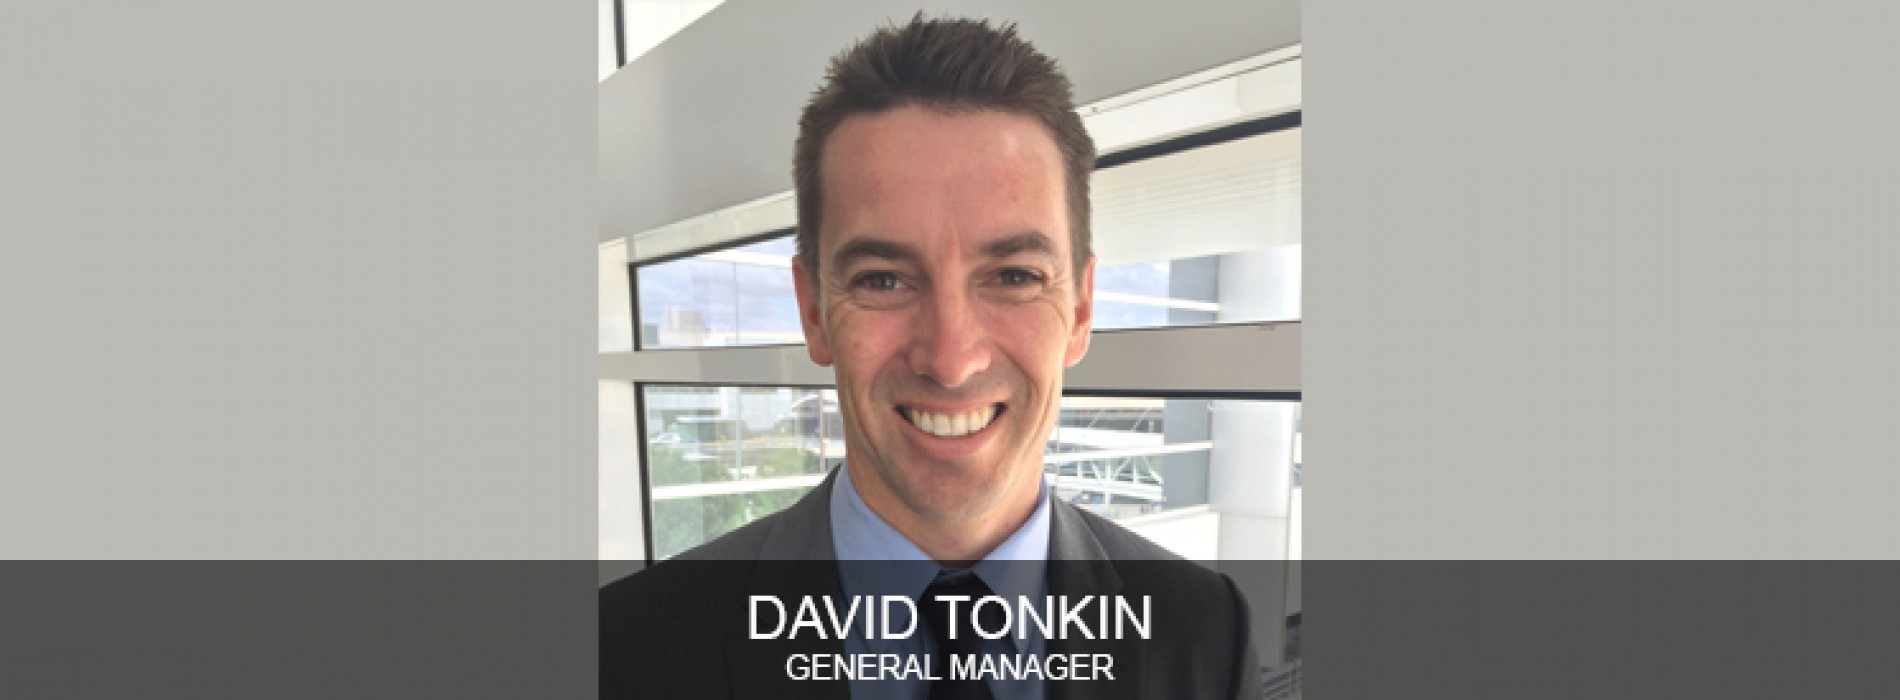 David Tonkin appointed General Manager of PARKROYAL Melbourne Airport